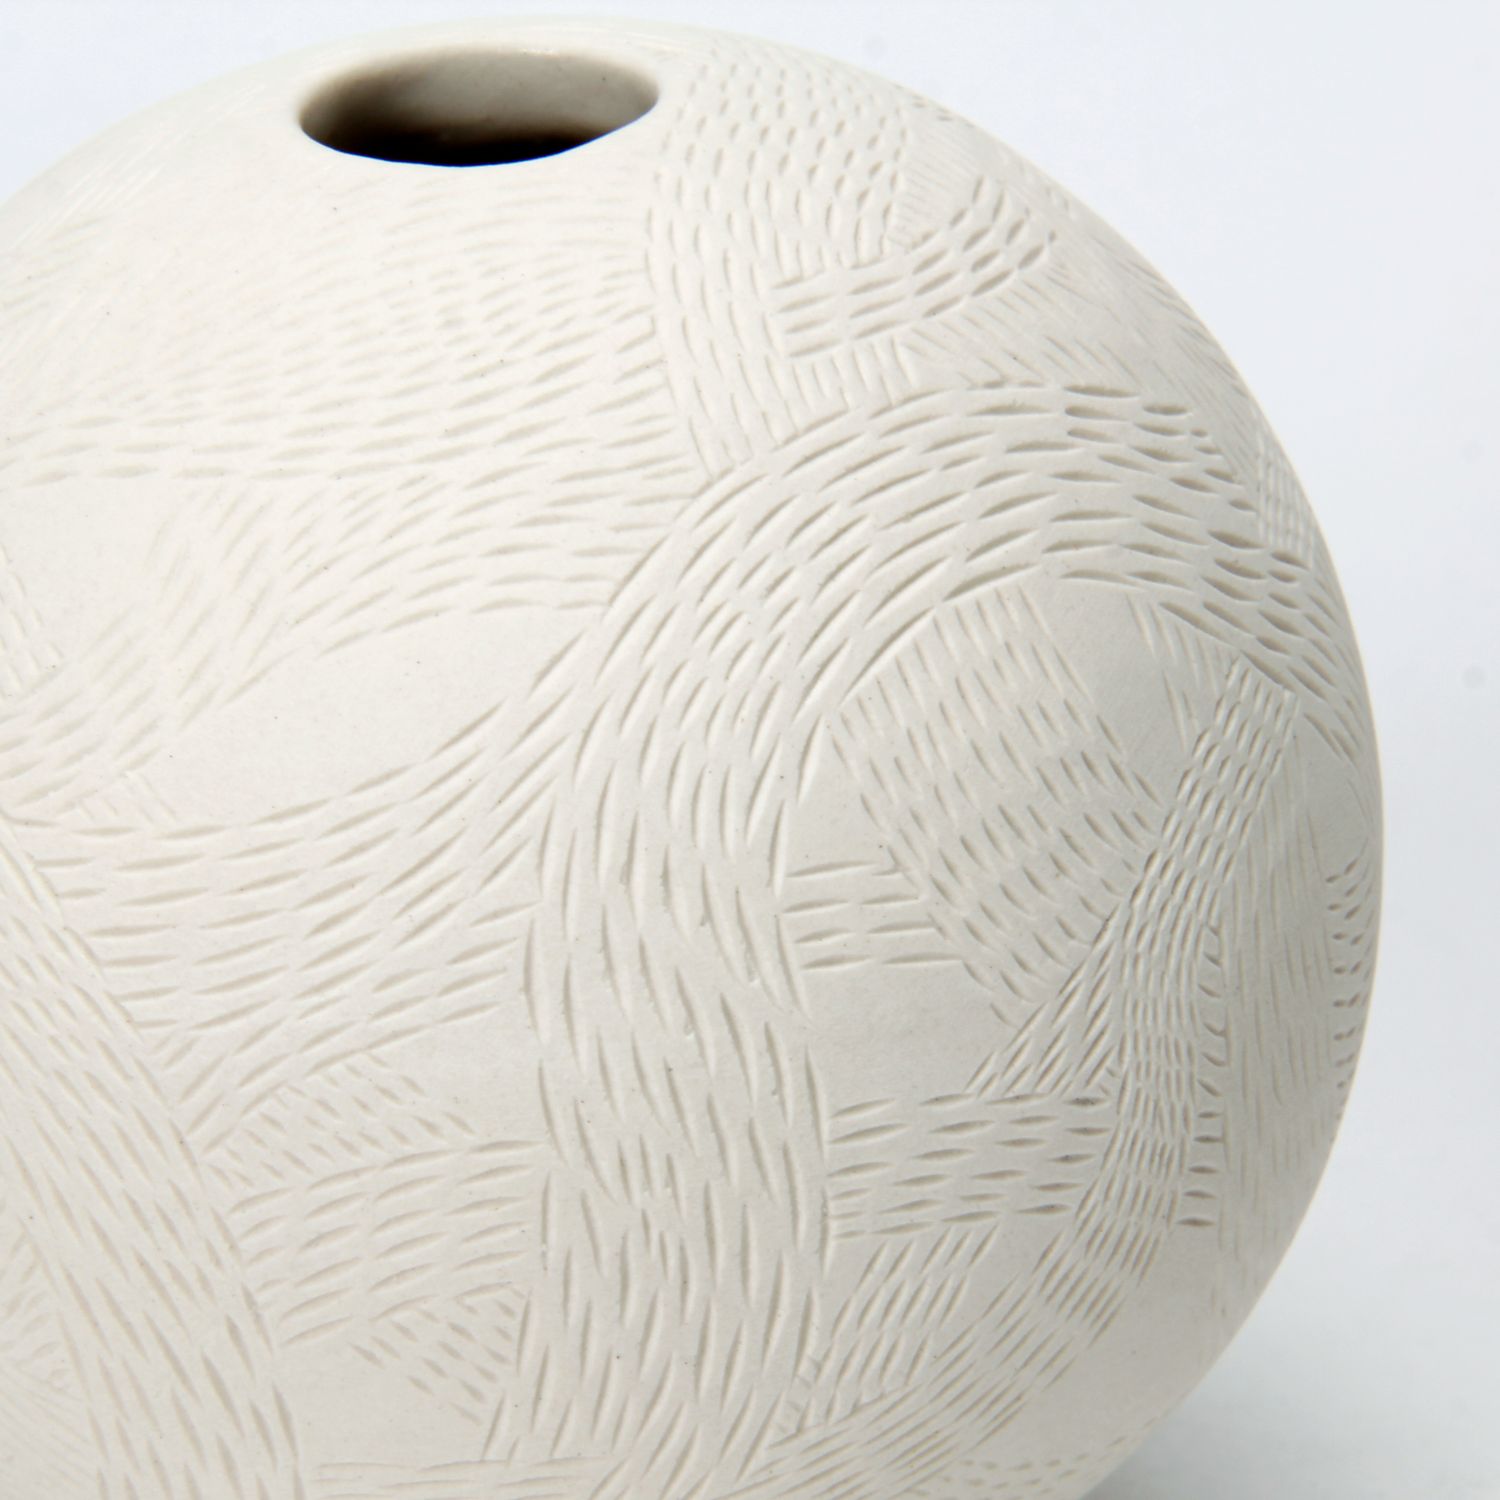 Talia Silva: Subtle Echoes – Orb Vessel Fully Carved Product Image 2 of 2